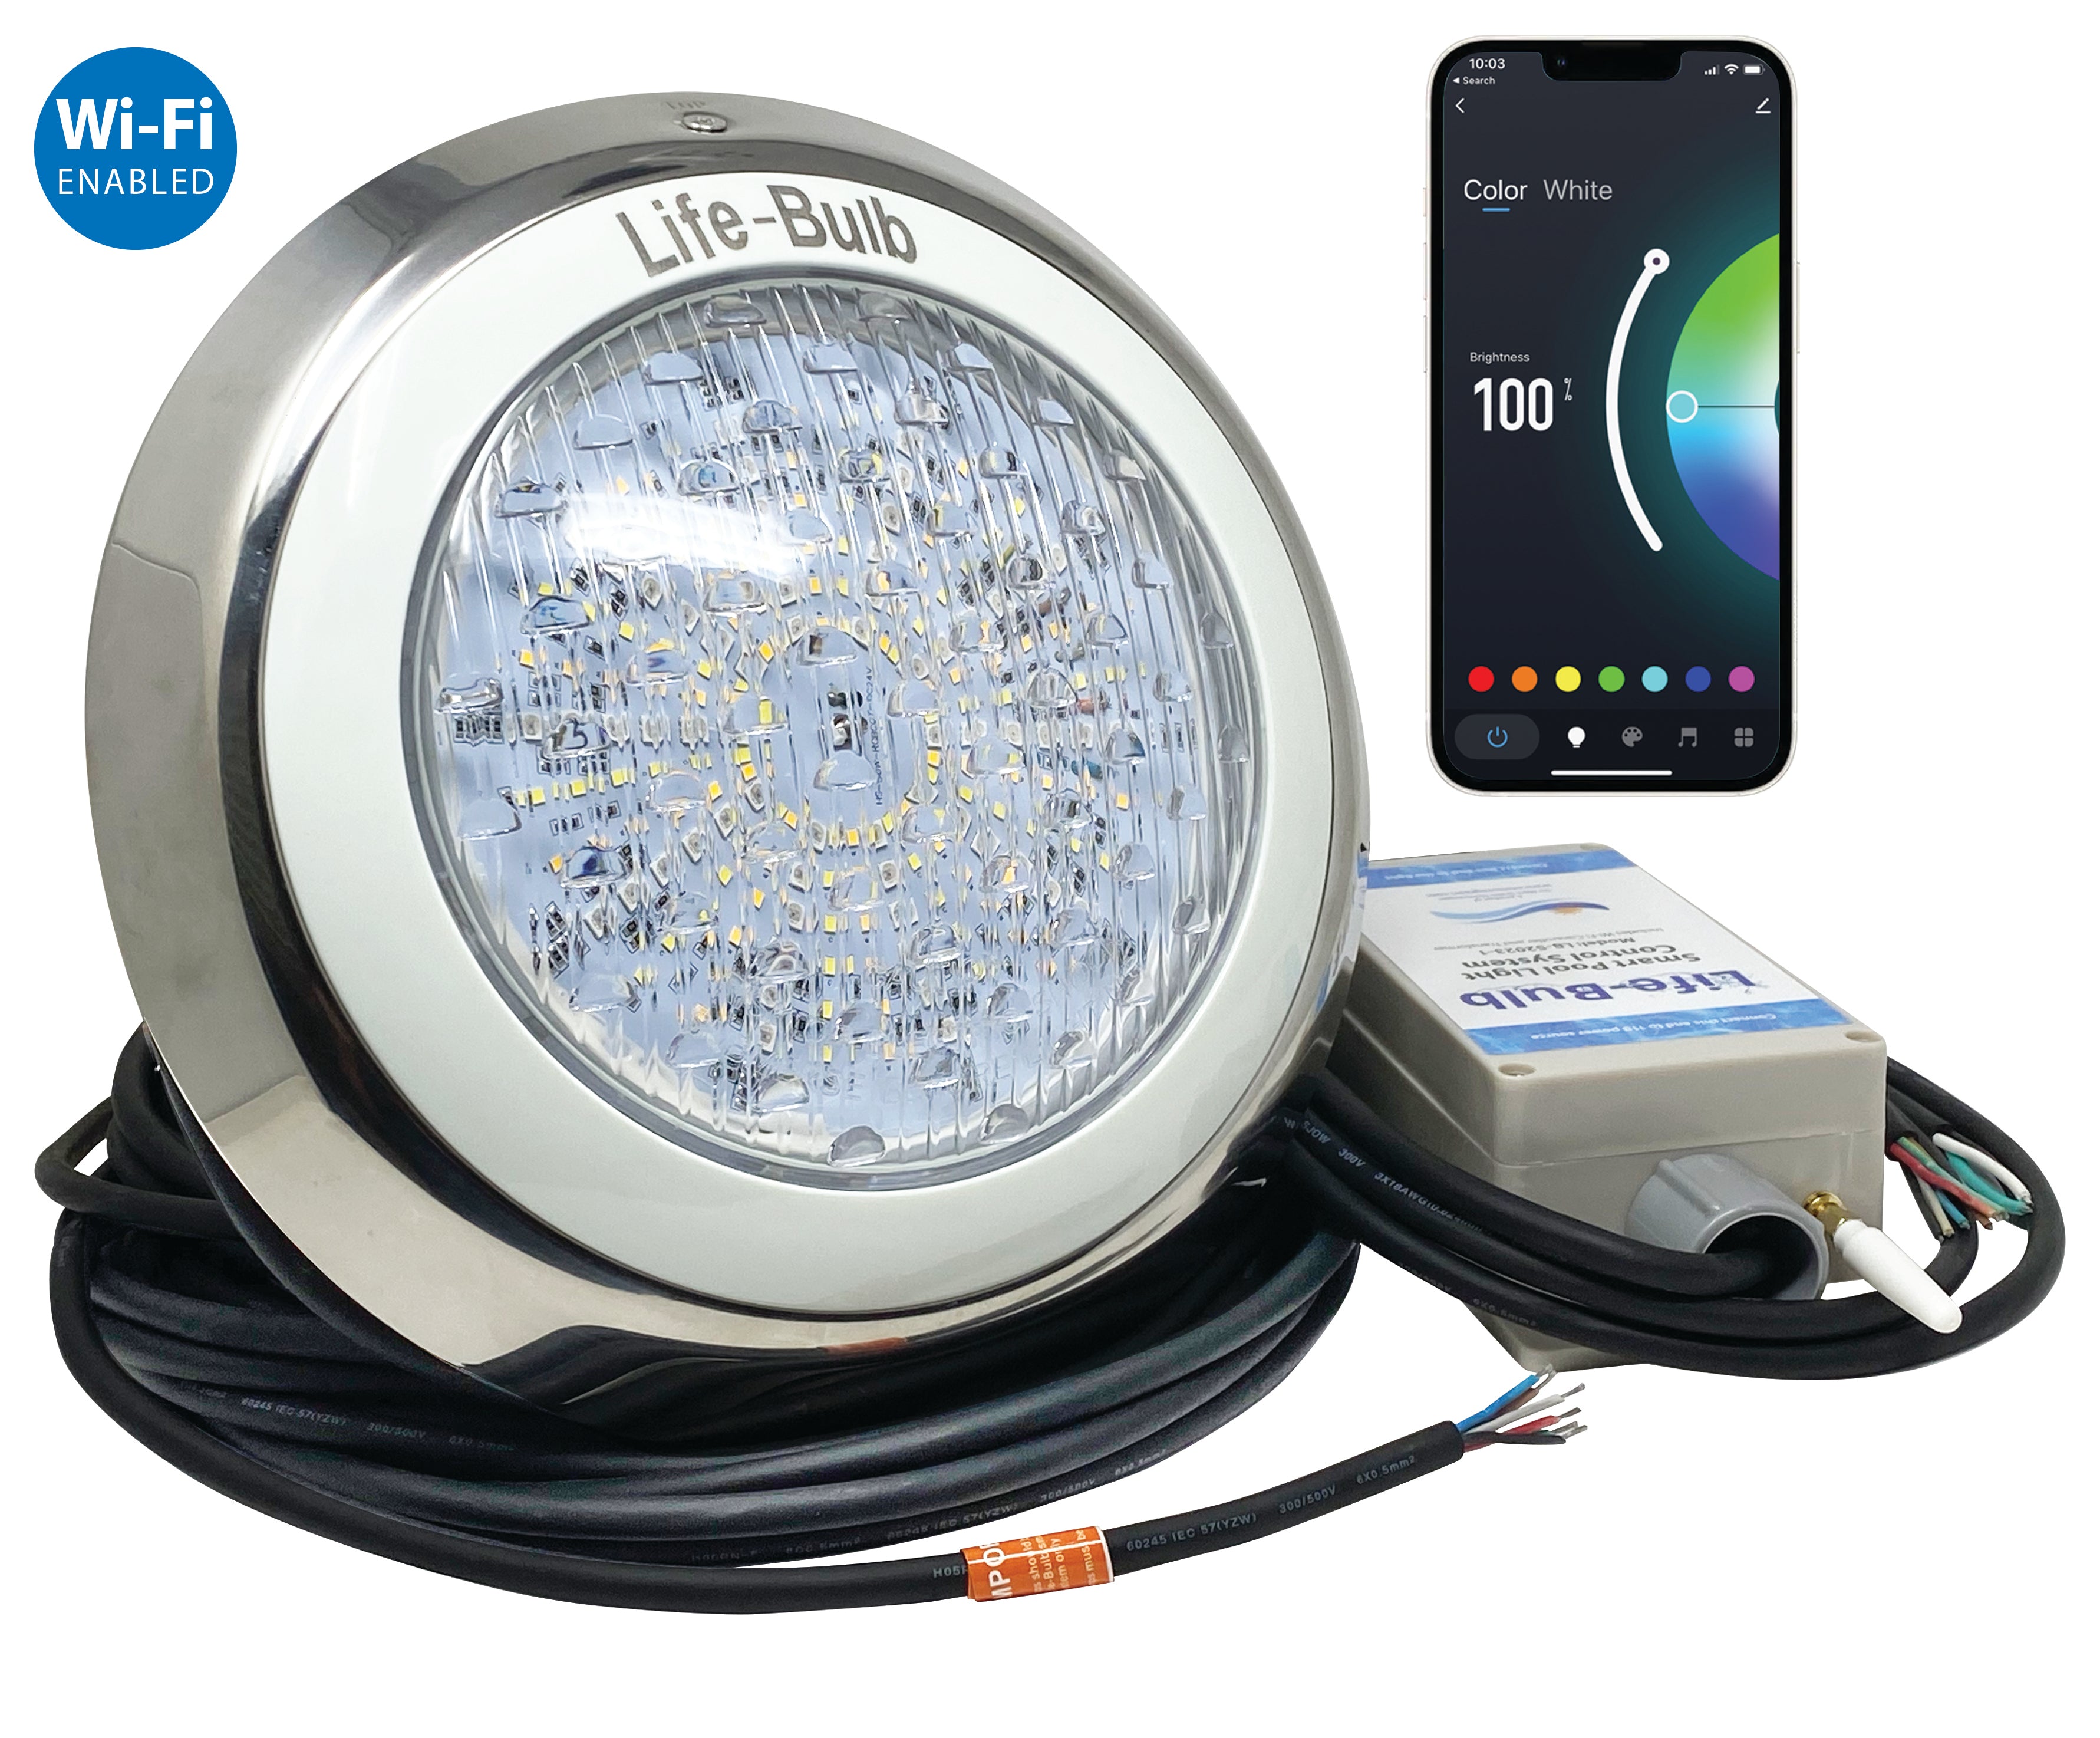 Life-Bulb Smart LED Color Changing Wall Mount Pool Light | Works with Remote or Smartphone App - iOS or Android | Lifetime Replacement Warranty | 75ft Cable